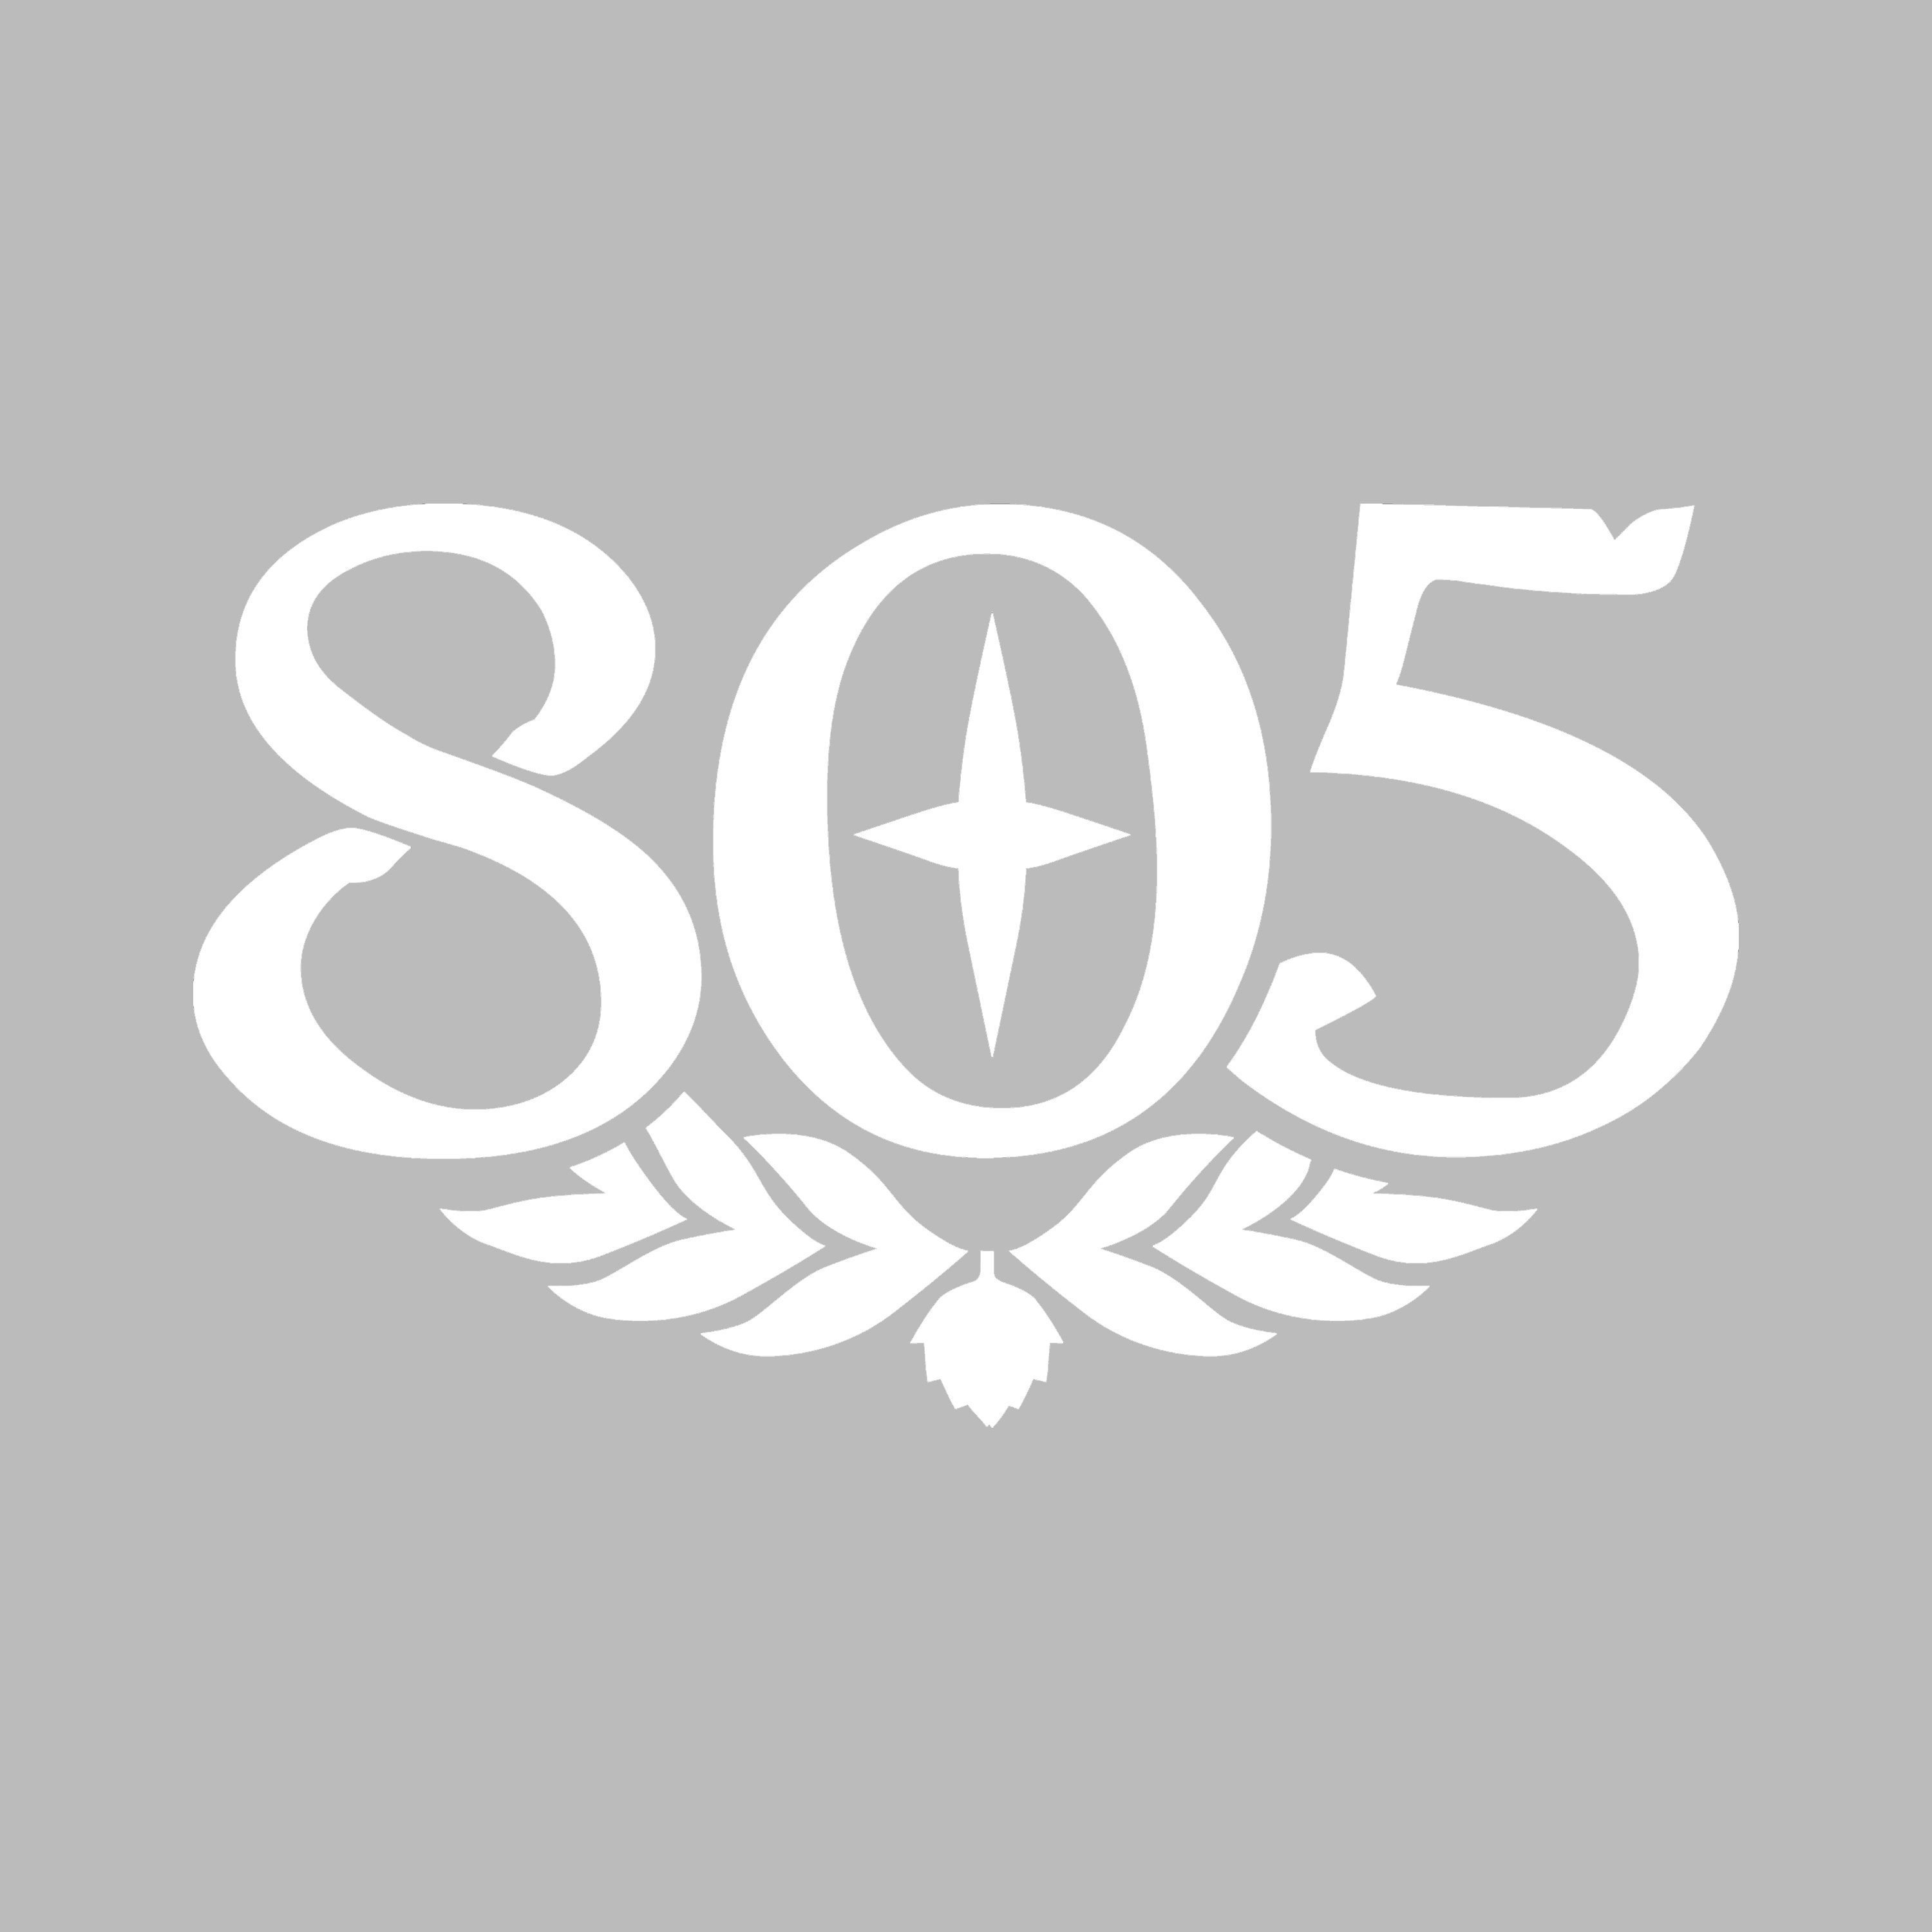 JUST DROPPED: 805 X YETI - 805 Beer